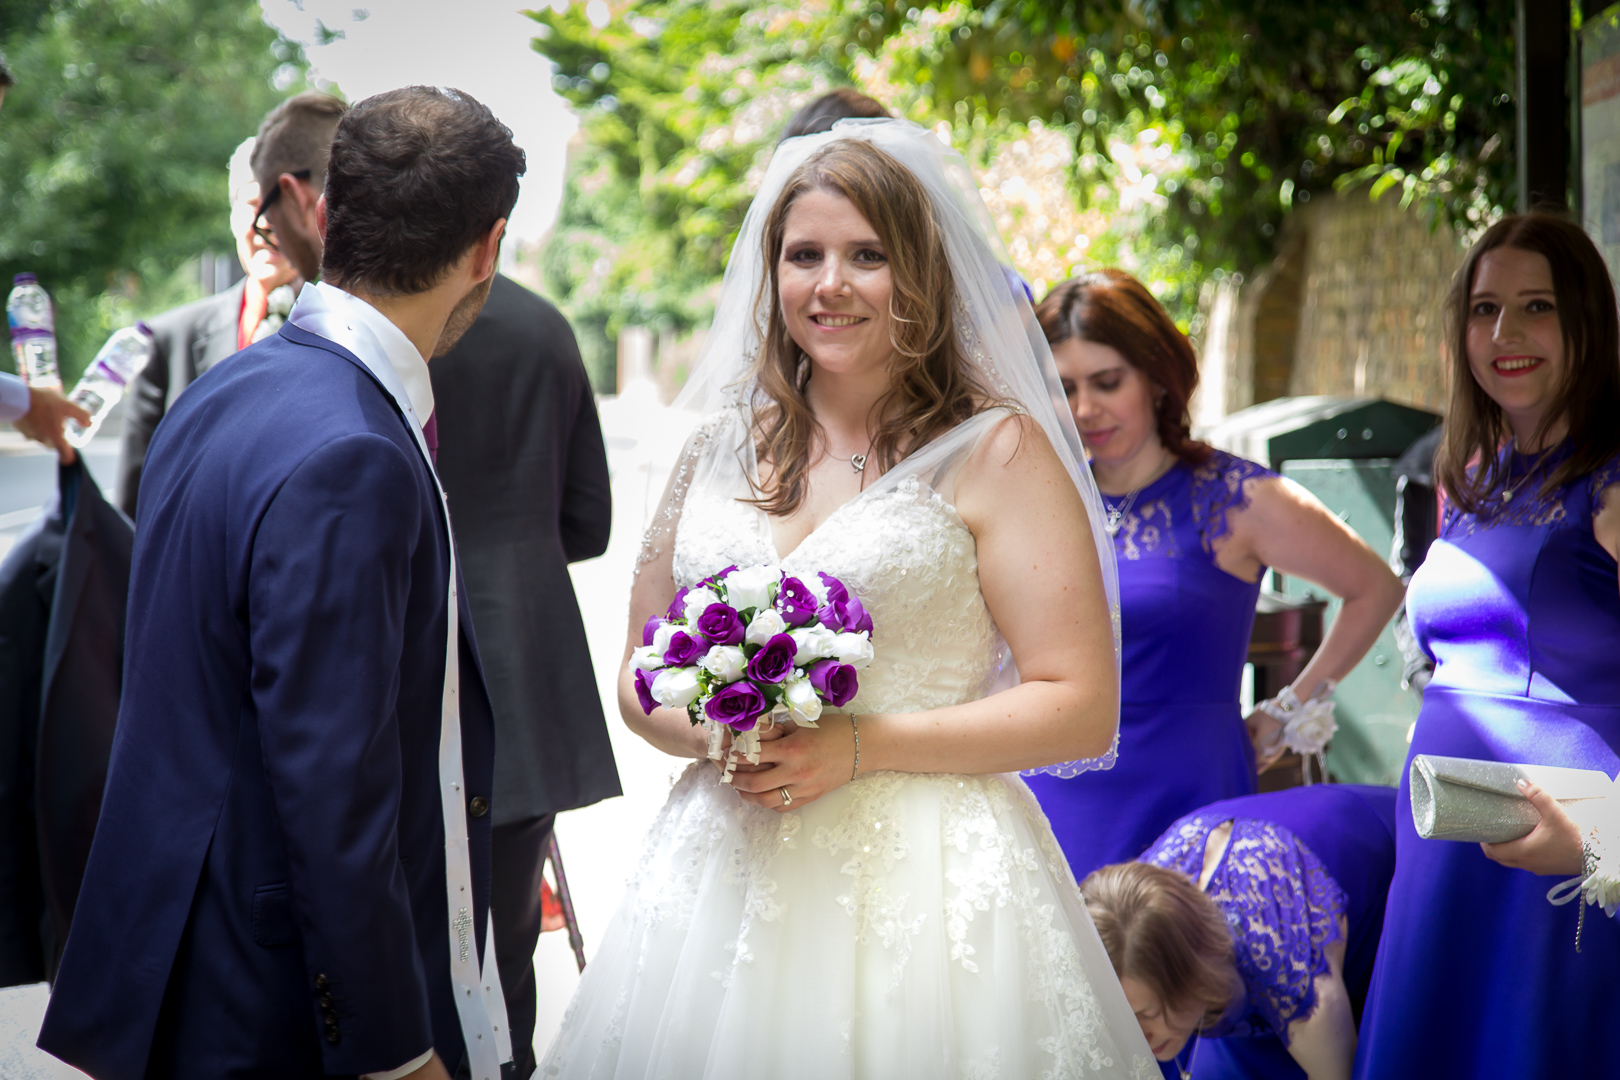 Wedding photograph of Sarah & Basil at The Grange in Northwood Middlesex by Tim Durham of Pinner Wedding Photography. Photographer in Northwood. Photographer in Harrow. Photographer in Moor Park.